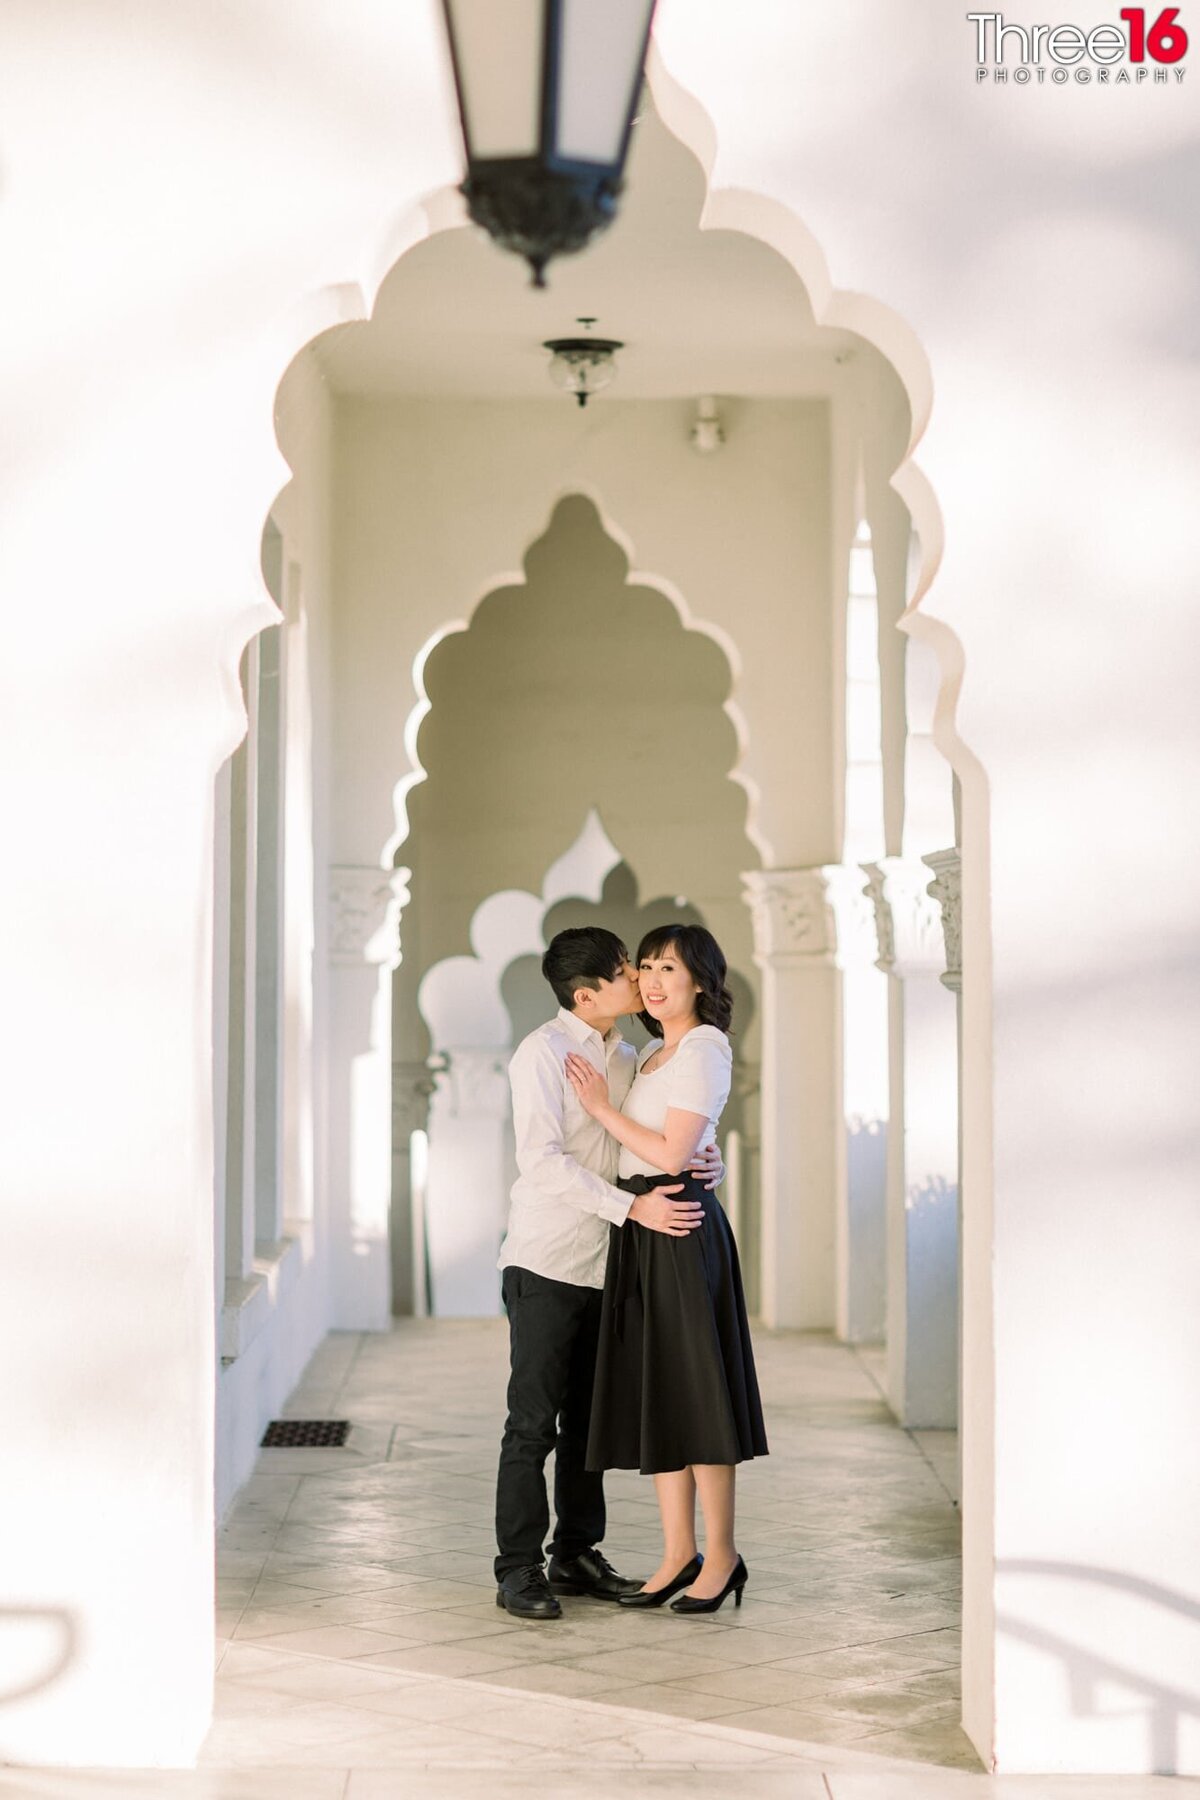 Brand Library Park Engagement Photos-1016